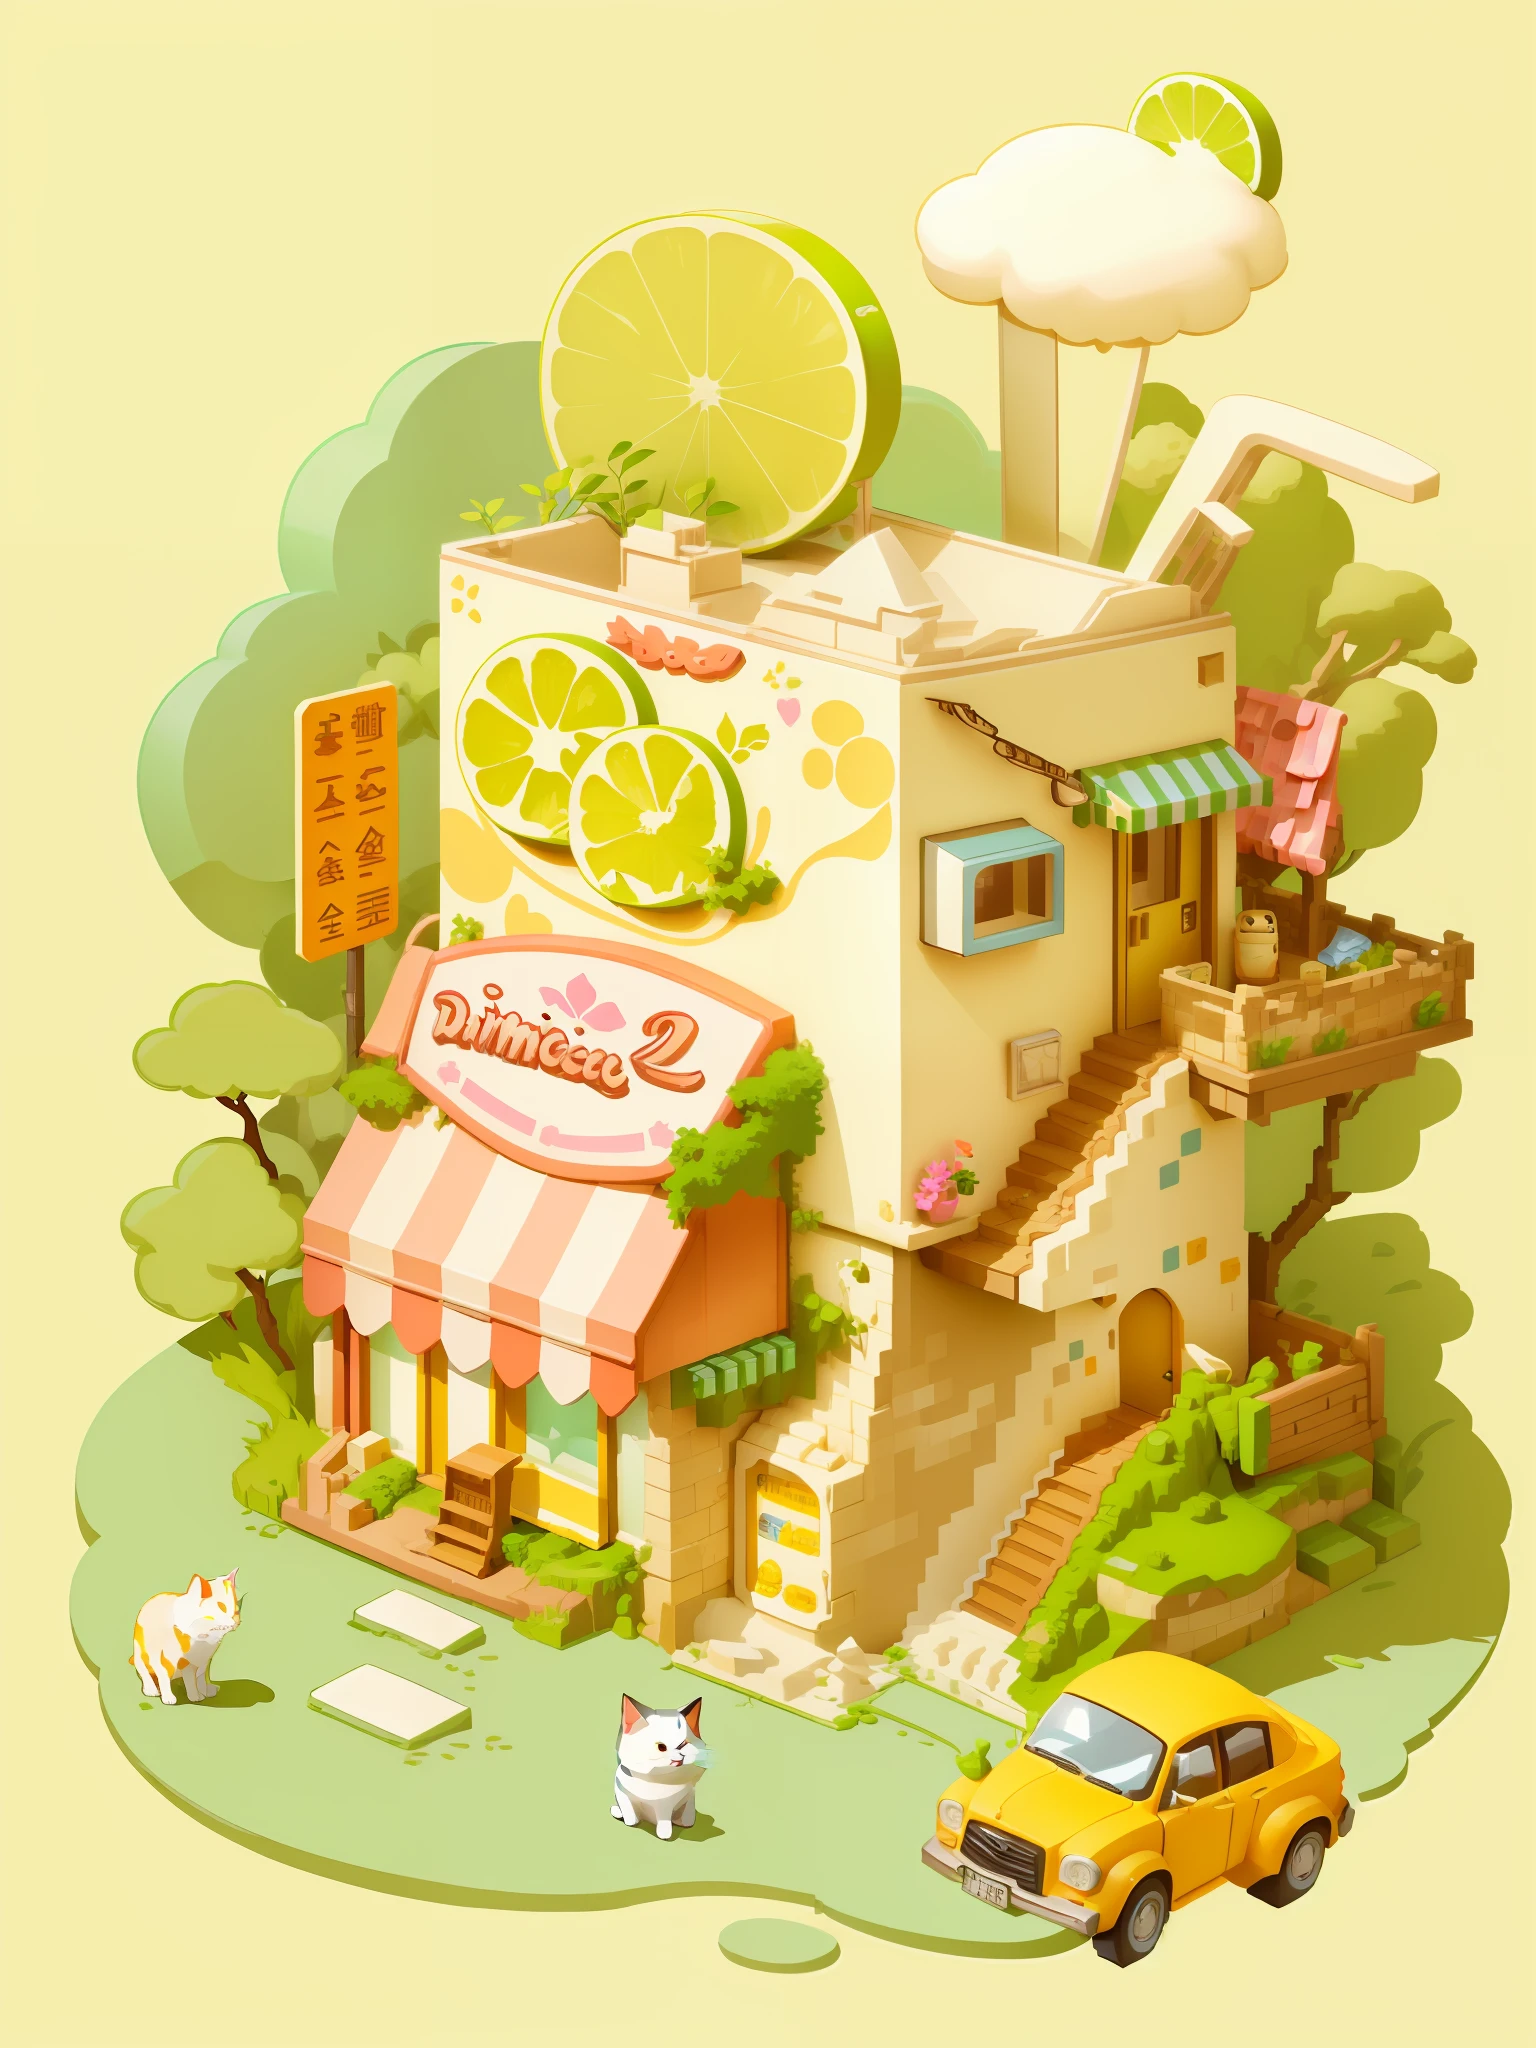 Masterpiece, best quality, cartoon, 3D, illustration of a cat on it, small shop of a building and car with the exterior of lemon yogurt pack, three-story with roof, cute detailed digital art, inspired by Yanagawa Shinda, cute illustration, isometric illustration fun, isometric game art, isometric 2D game art, isometric illustration, detailed game art, isometric art, detailed 2D illustration, pixel art isometric drawing,